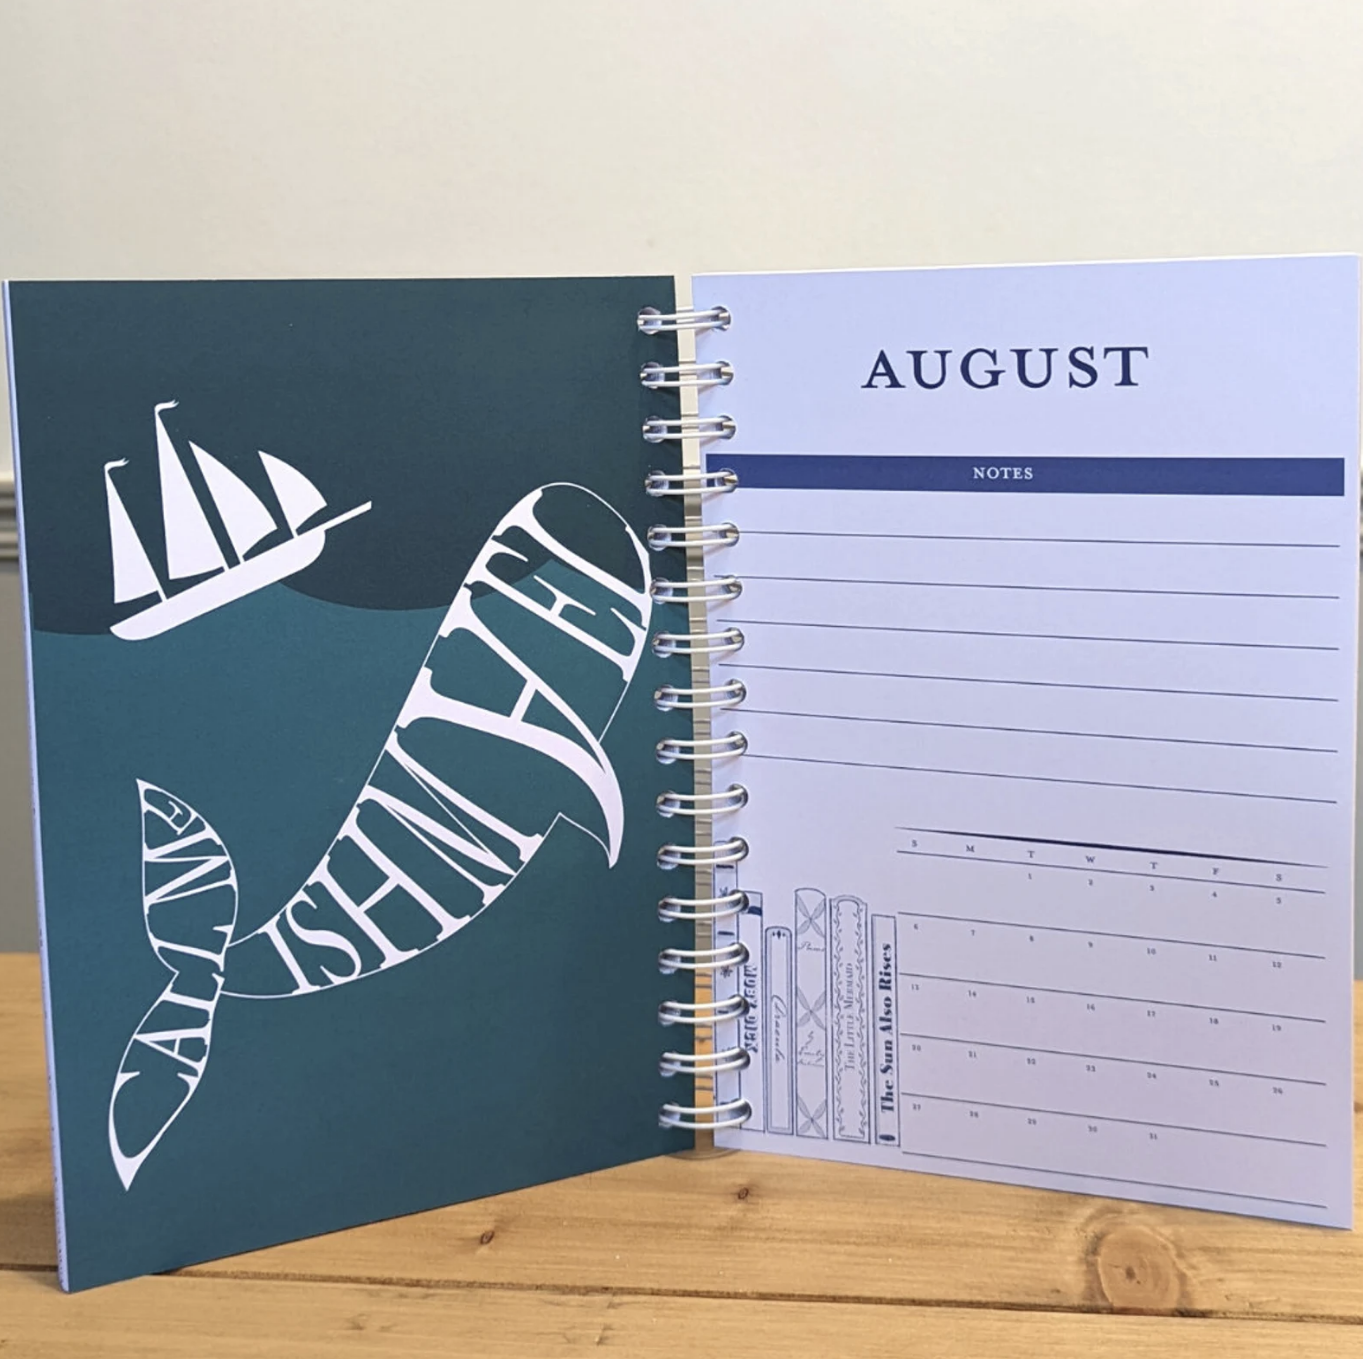 open planner with an image of a whale made up of the letters call me ishmael next to the first page of the month of august section of the planner